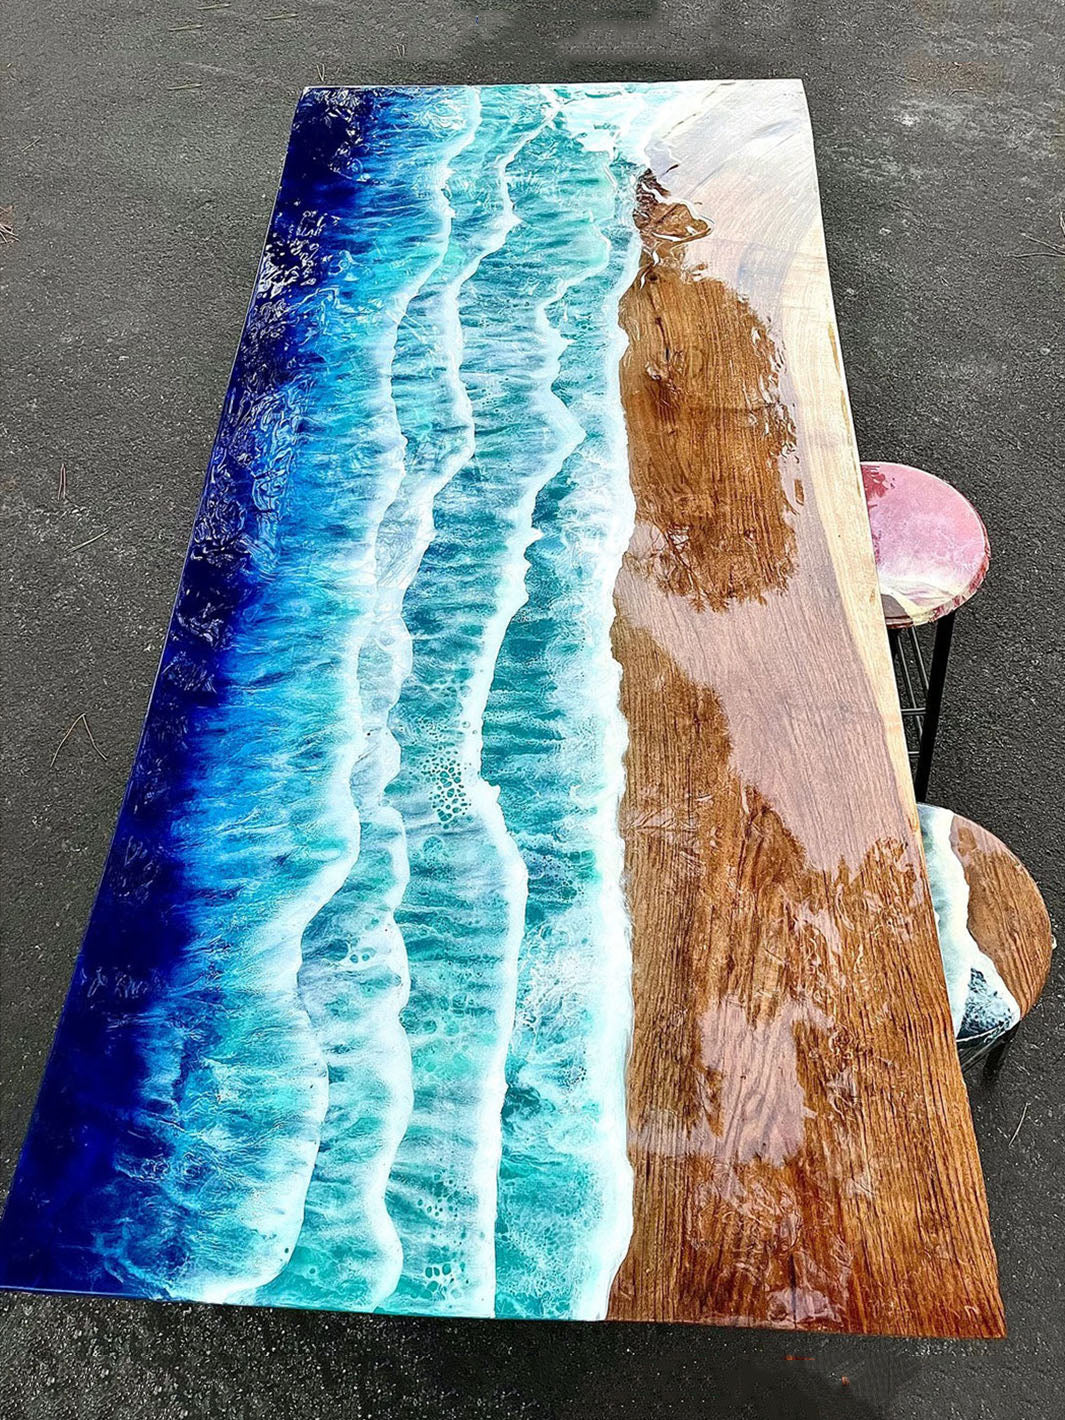 84"x42" Handcrafted Beach Inspired Elongated Epoxy Resin Dining Table Artsheedal Tables ART0140-3